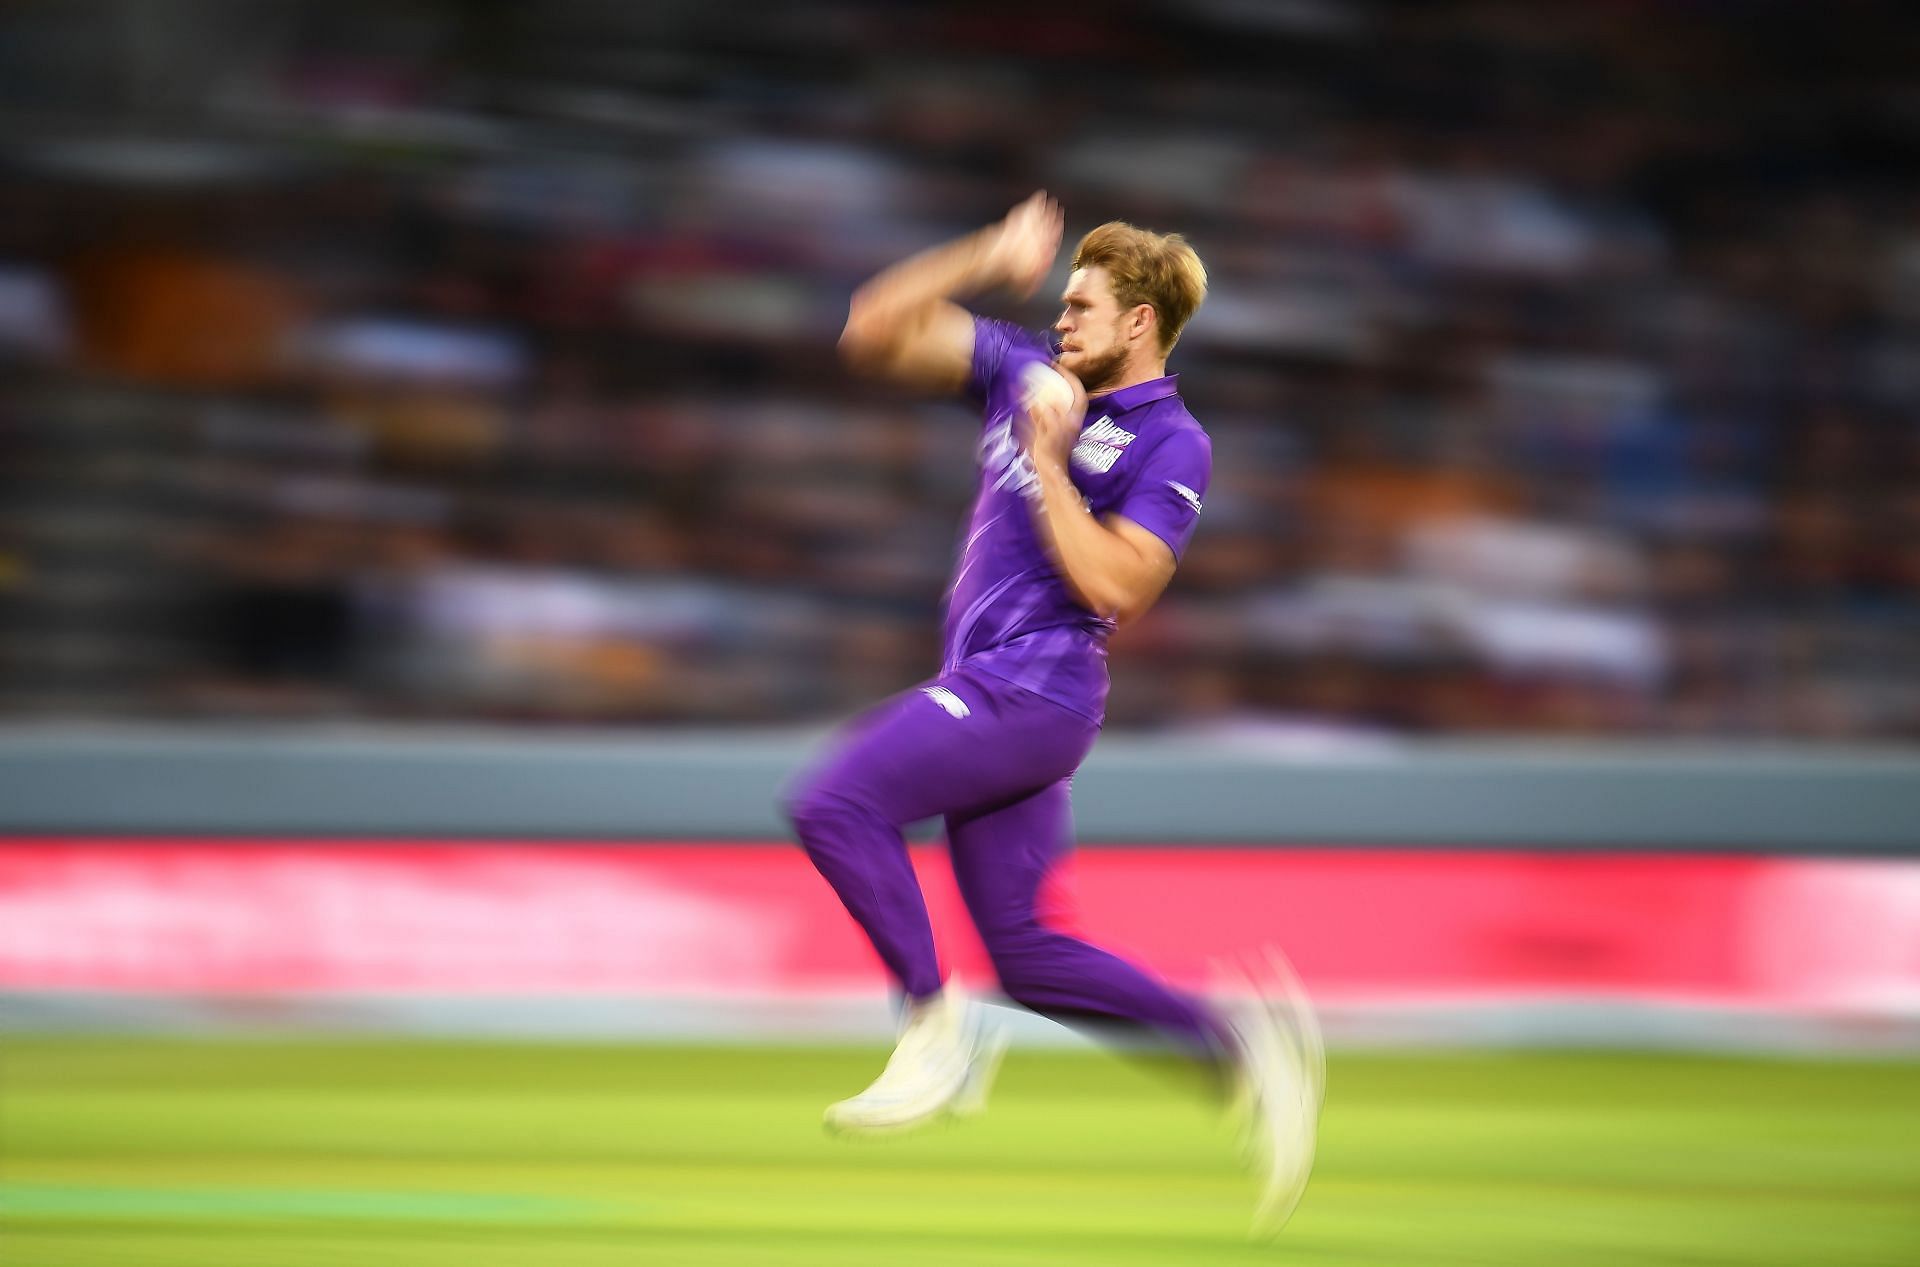 IPL 2022 will see David Willey begin his second stint with the league.